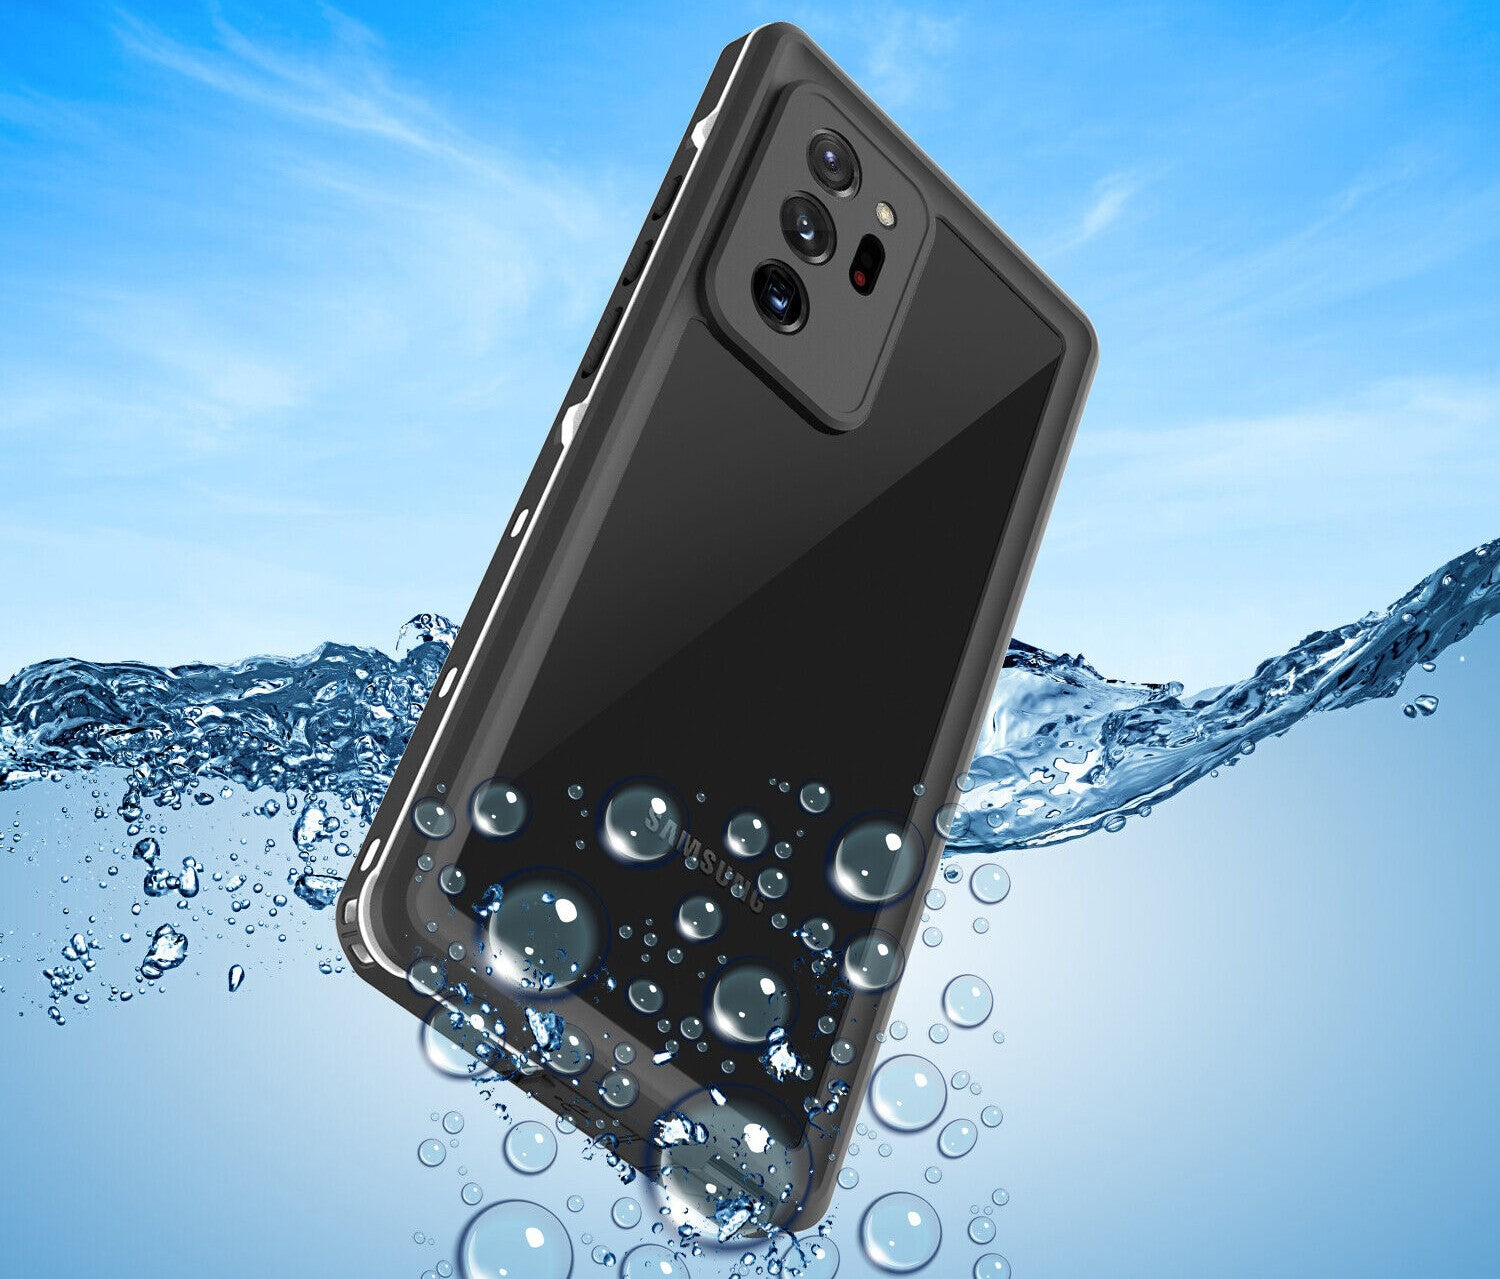 Waterproof Slim Life Proof Case for Samsung Note 20 Ultra Built-in Screen Protector Shockproof Dustproof Heavy Duty Full Body Protective Case (Black)